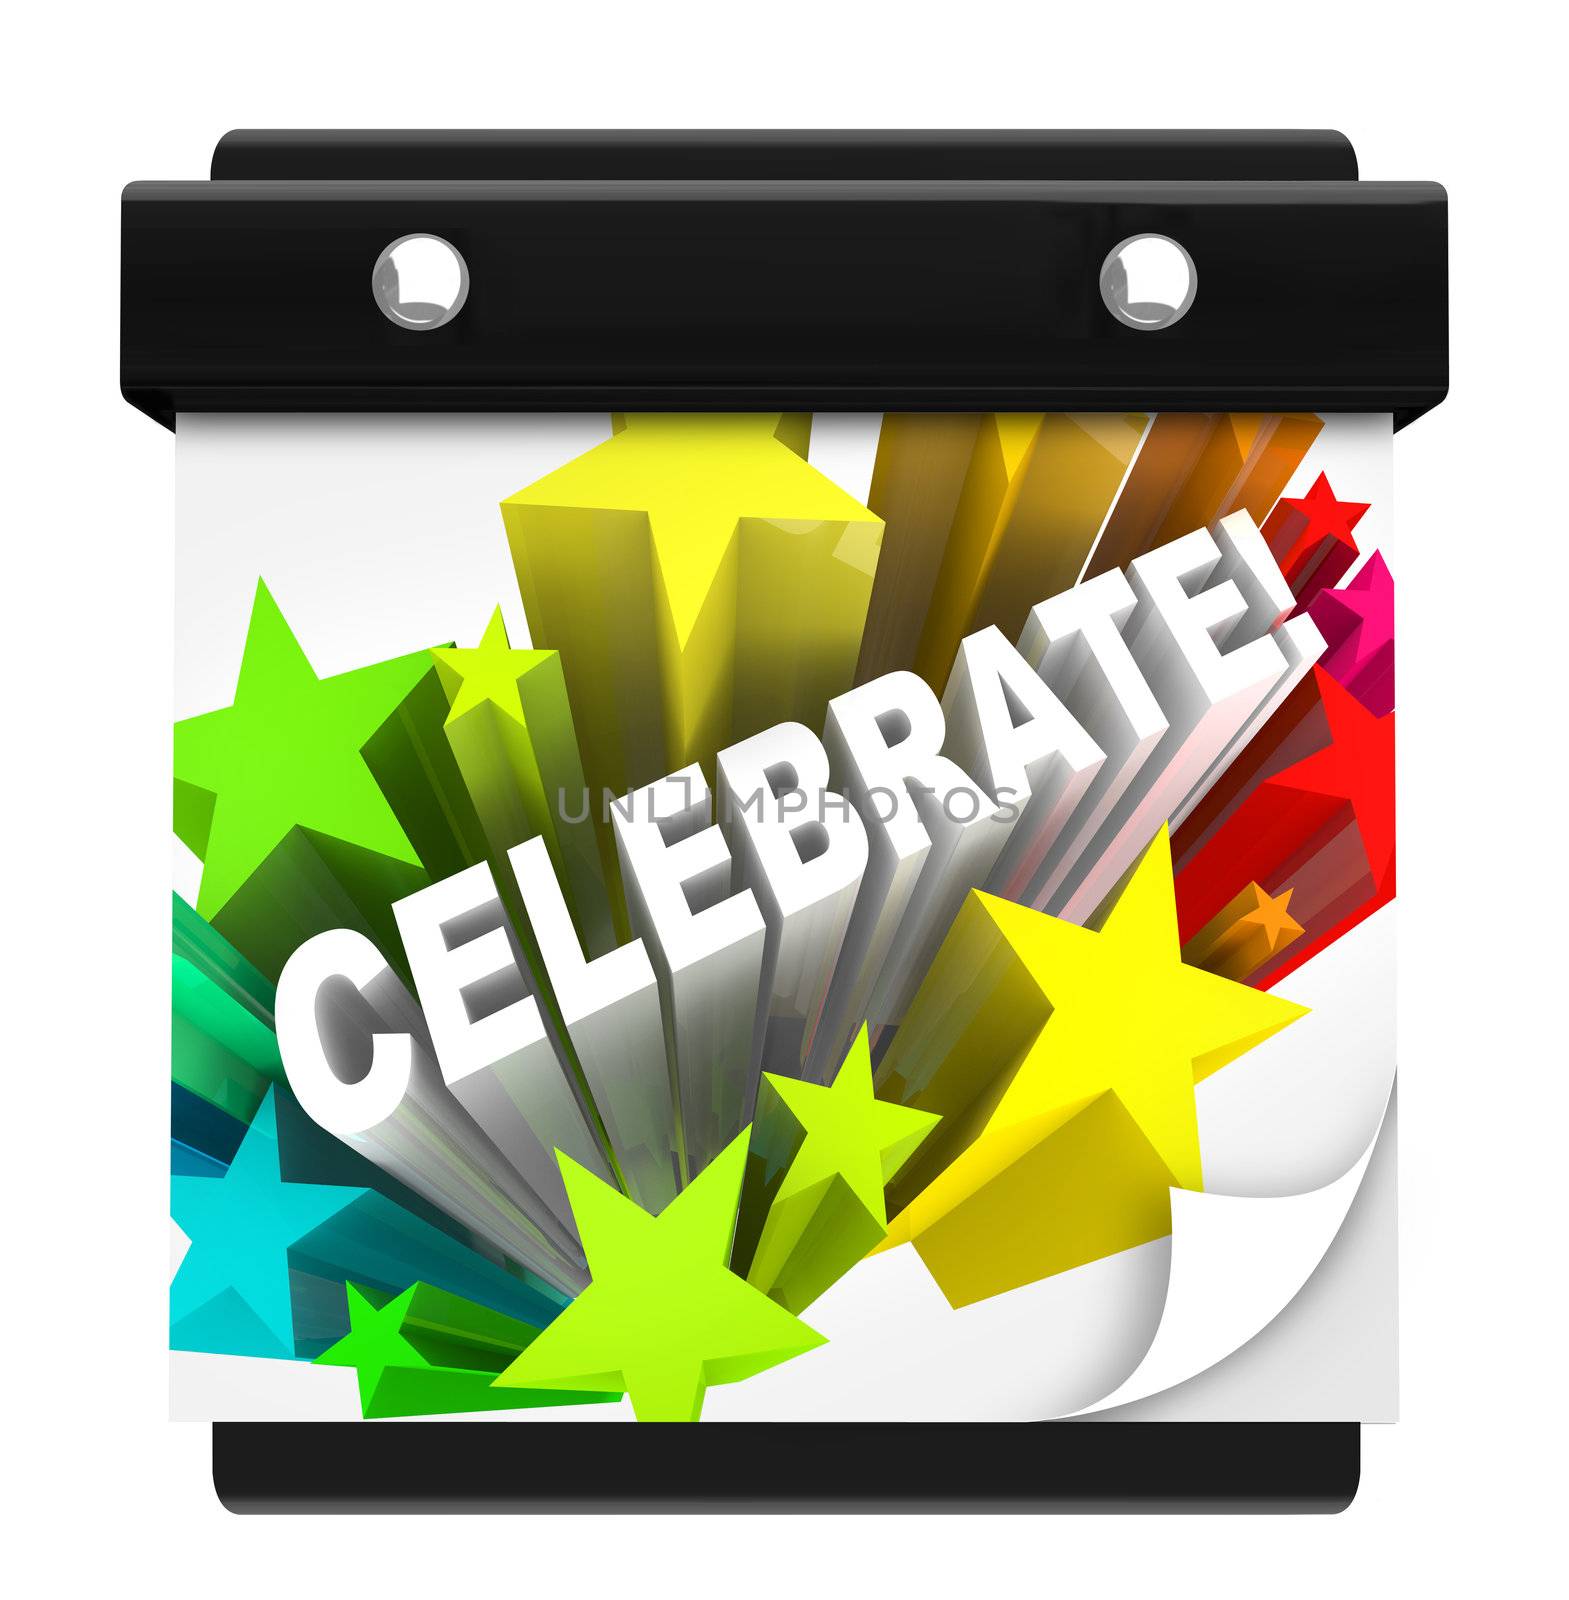 The word Celebrate in a star burst of fireworks on a wall calendar to remind you that it's the day or time for a holiday, vacation, party, birthday, anniversary or other special event